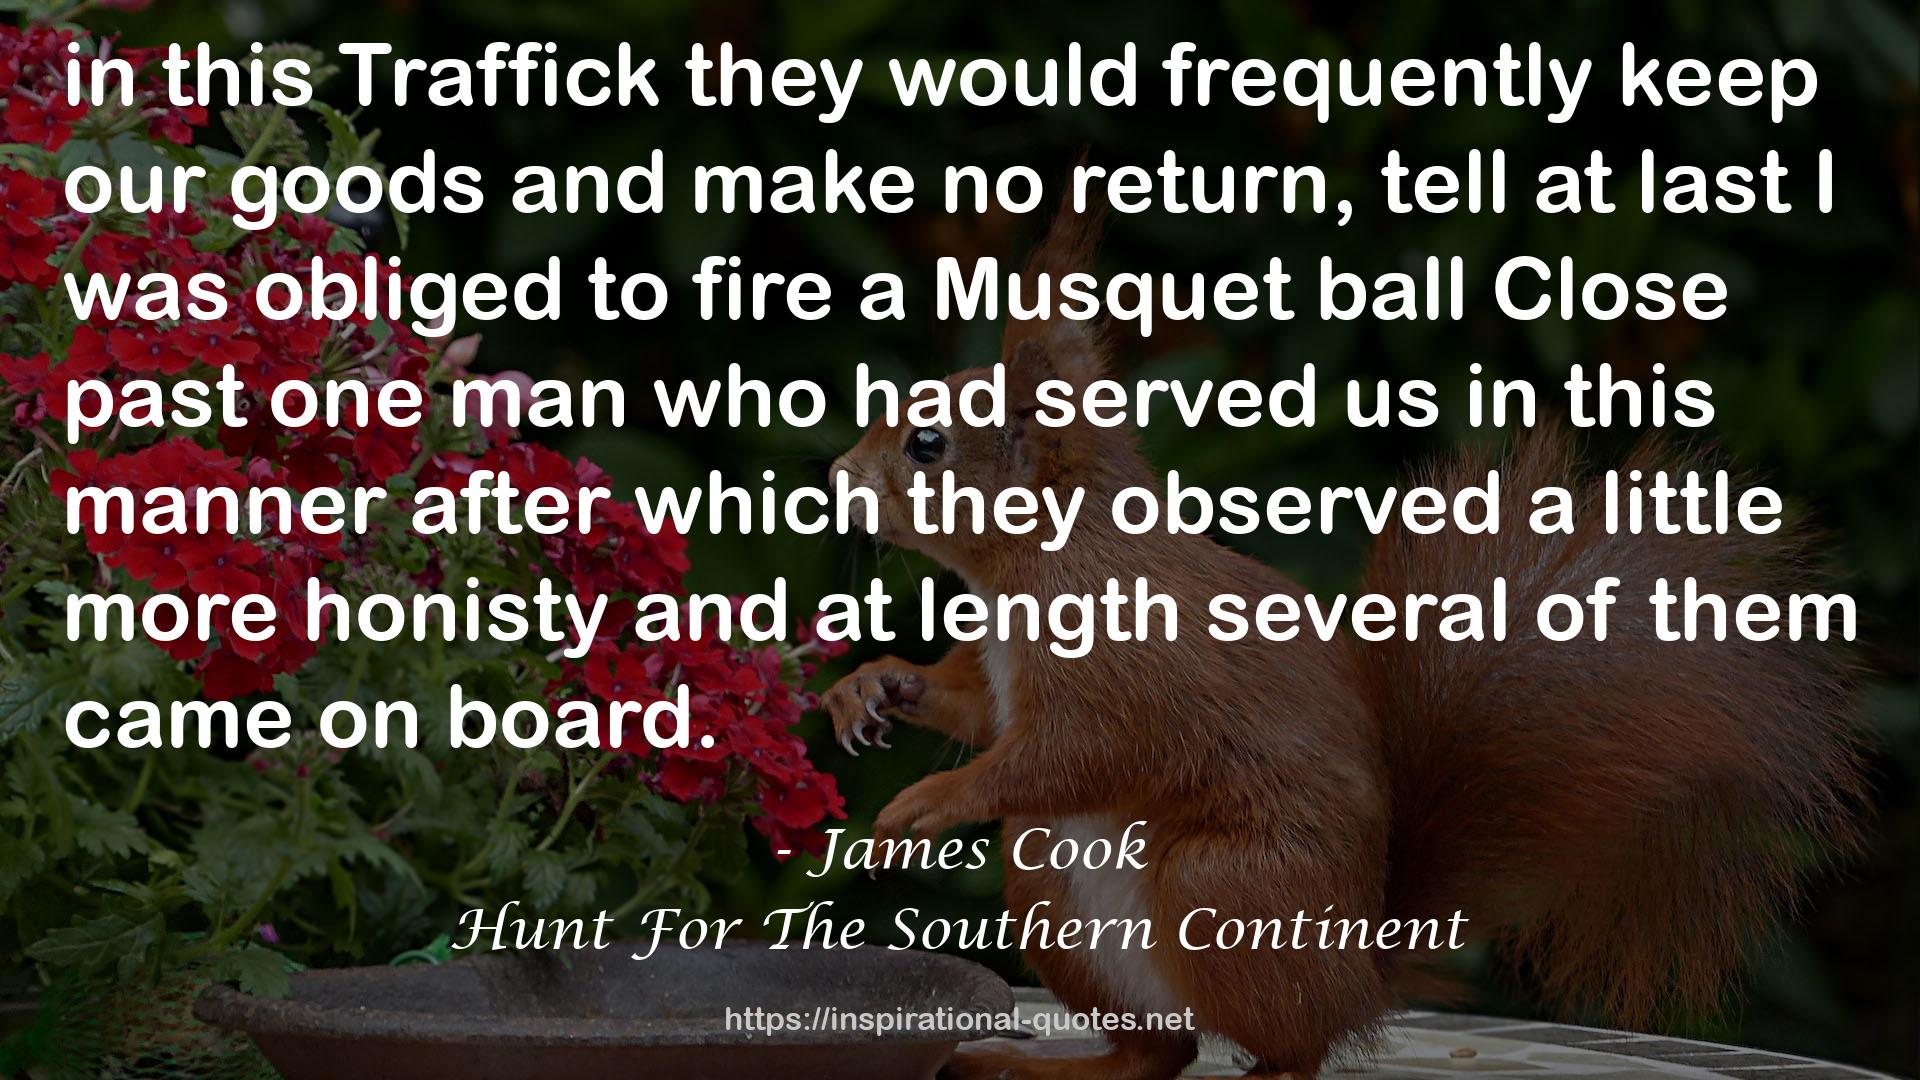 Hunt For The Southern Continent QUOTES